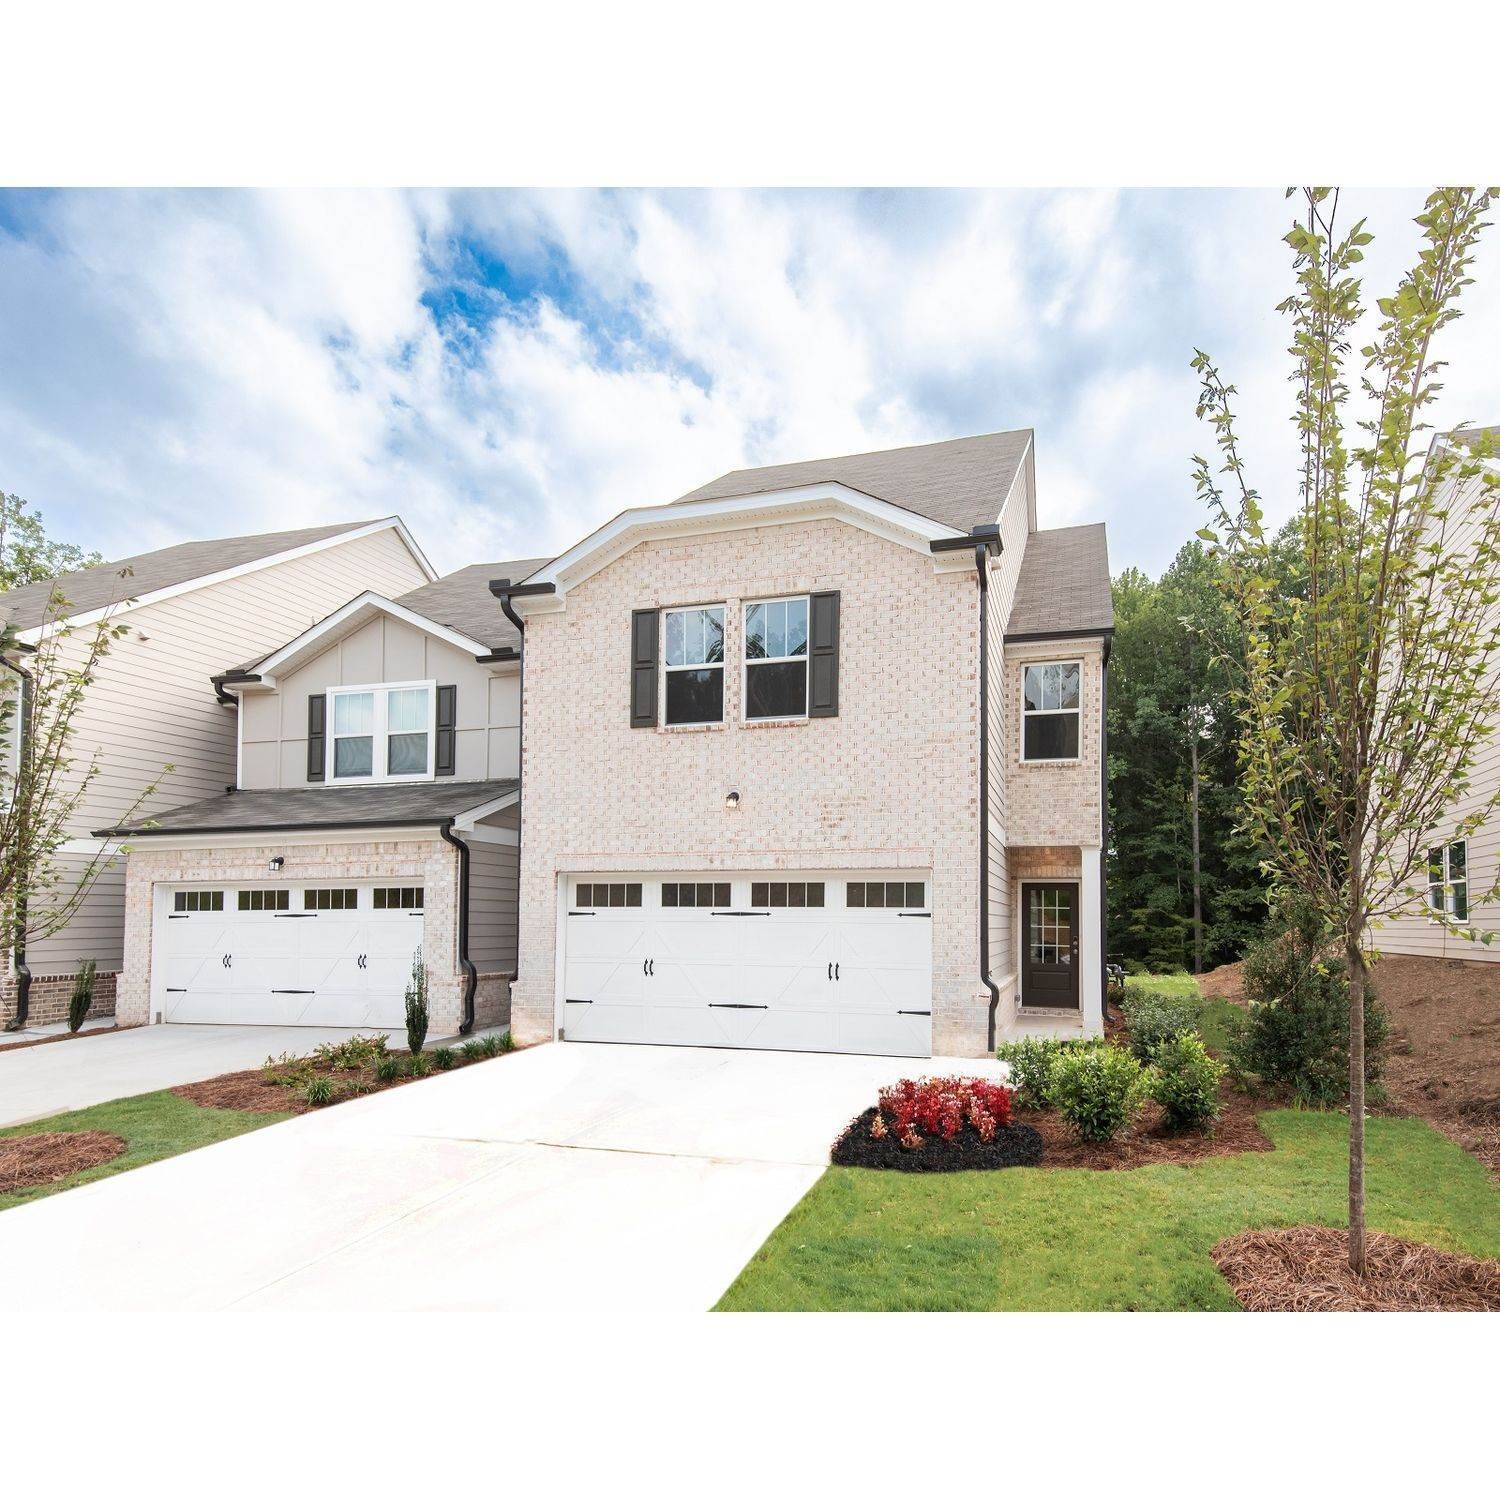 The Woods at Dawson Townhomes xây dựng tại 163 Magnolia Drive, Dawsonville, GA 30534